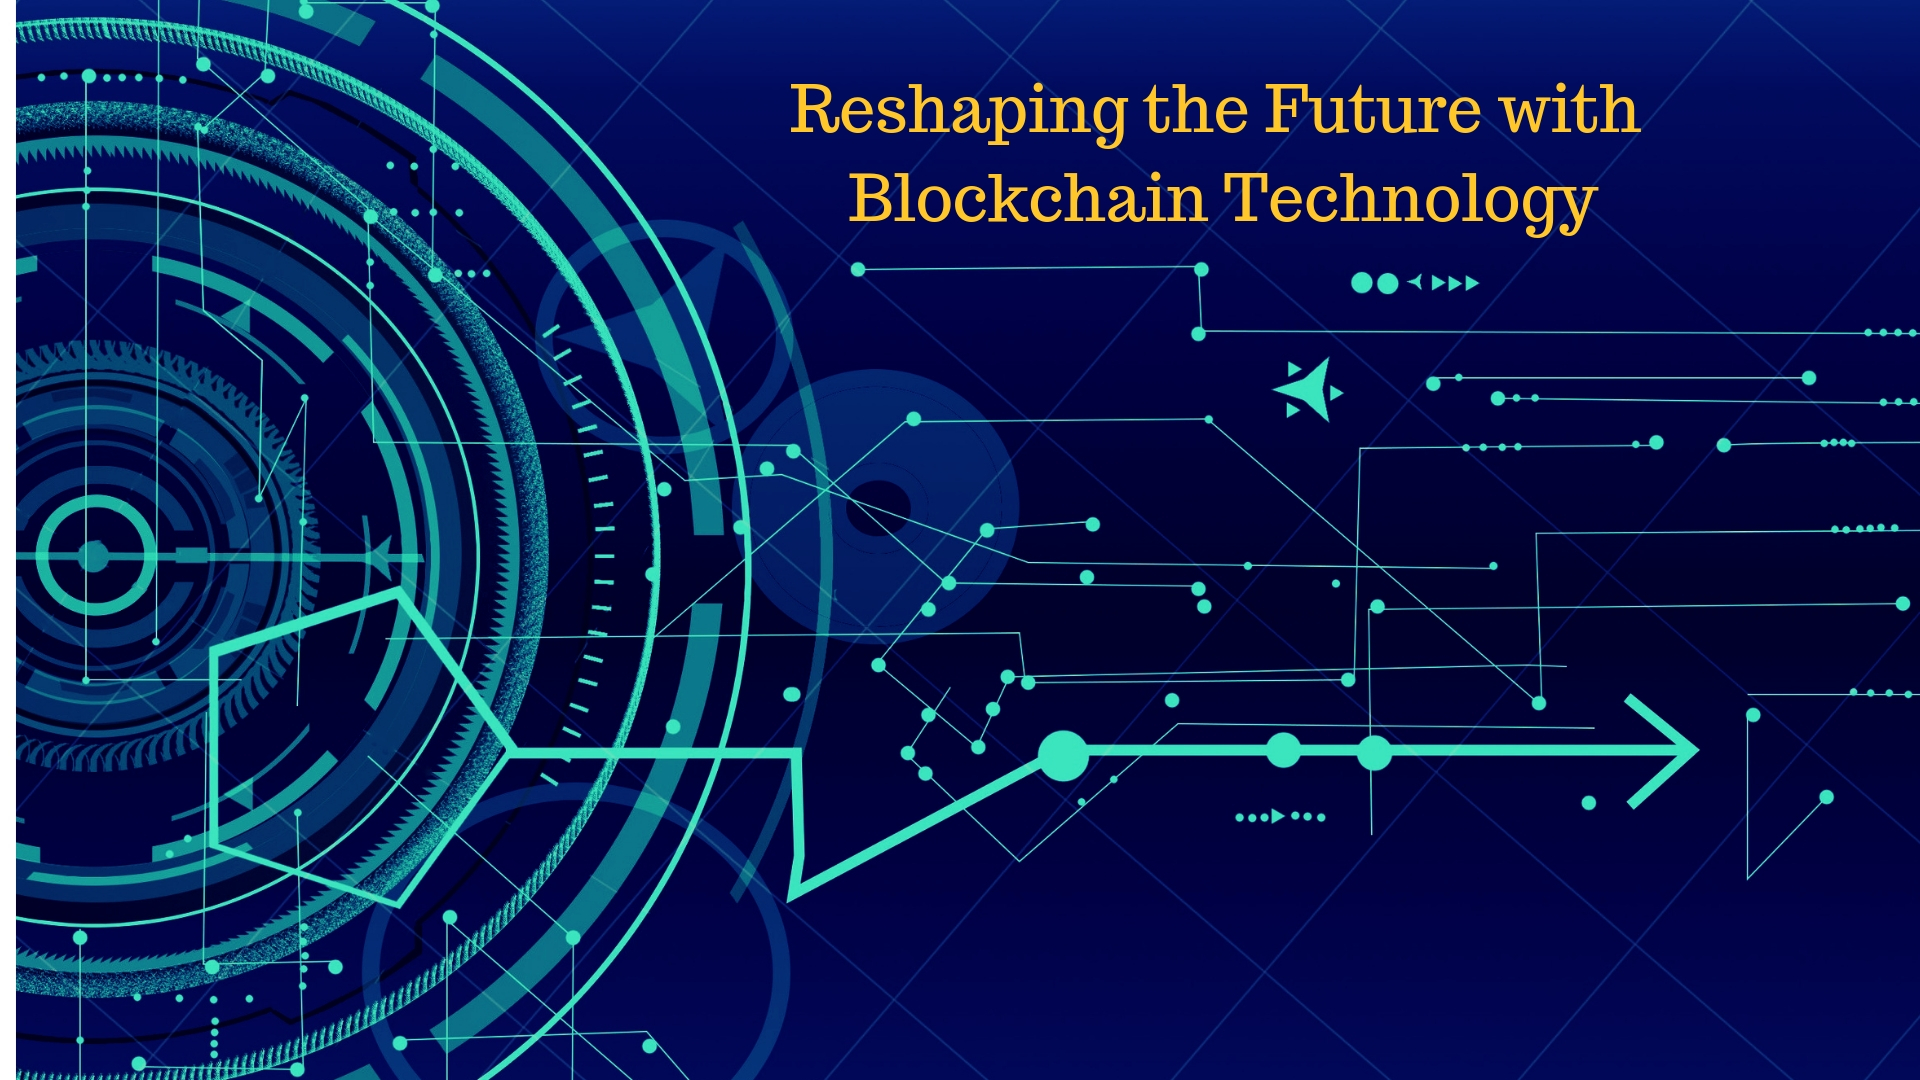 Reshaping the Future with Blockchain Technology